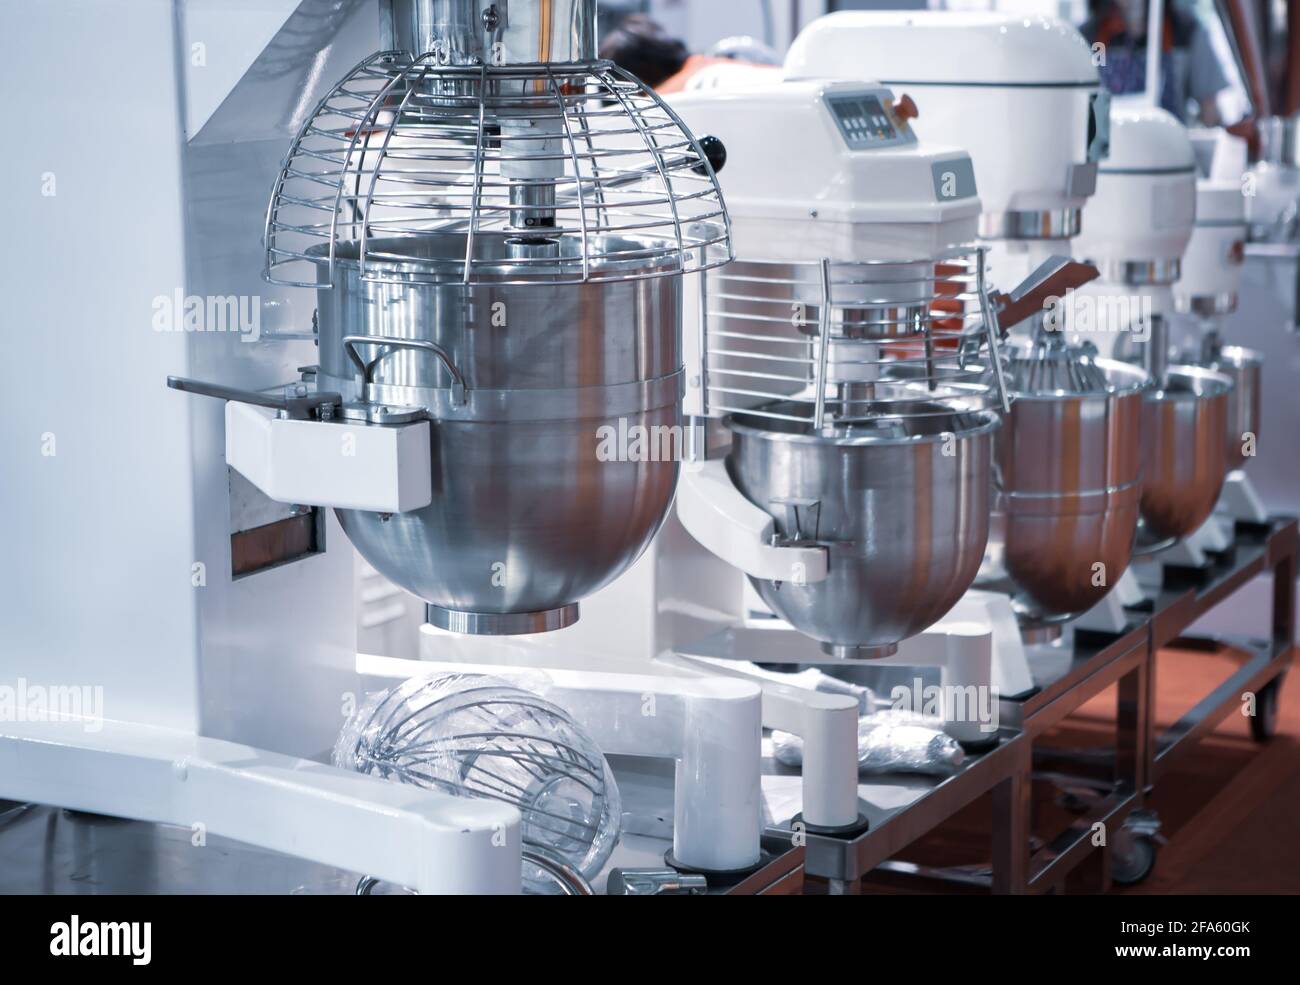 https://c8.alamy.com/comp/2FA60GK/close-up-of-commercial-bread-mixer-food-mixing-machine-for-food-industry-2FA60GK.jpg